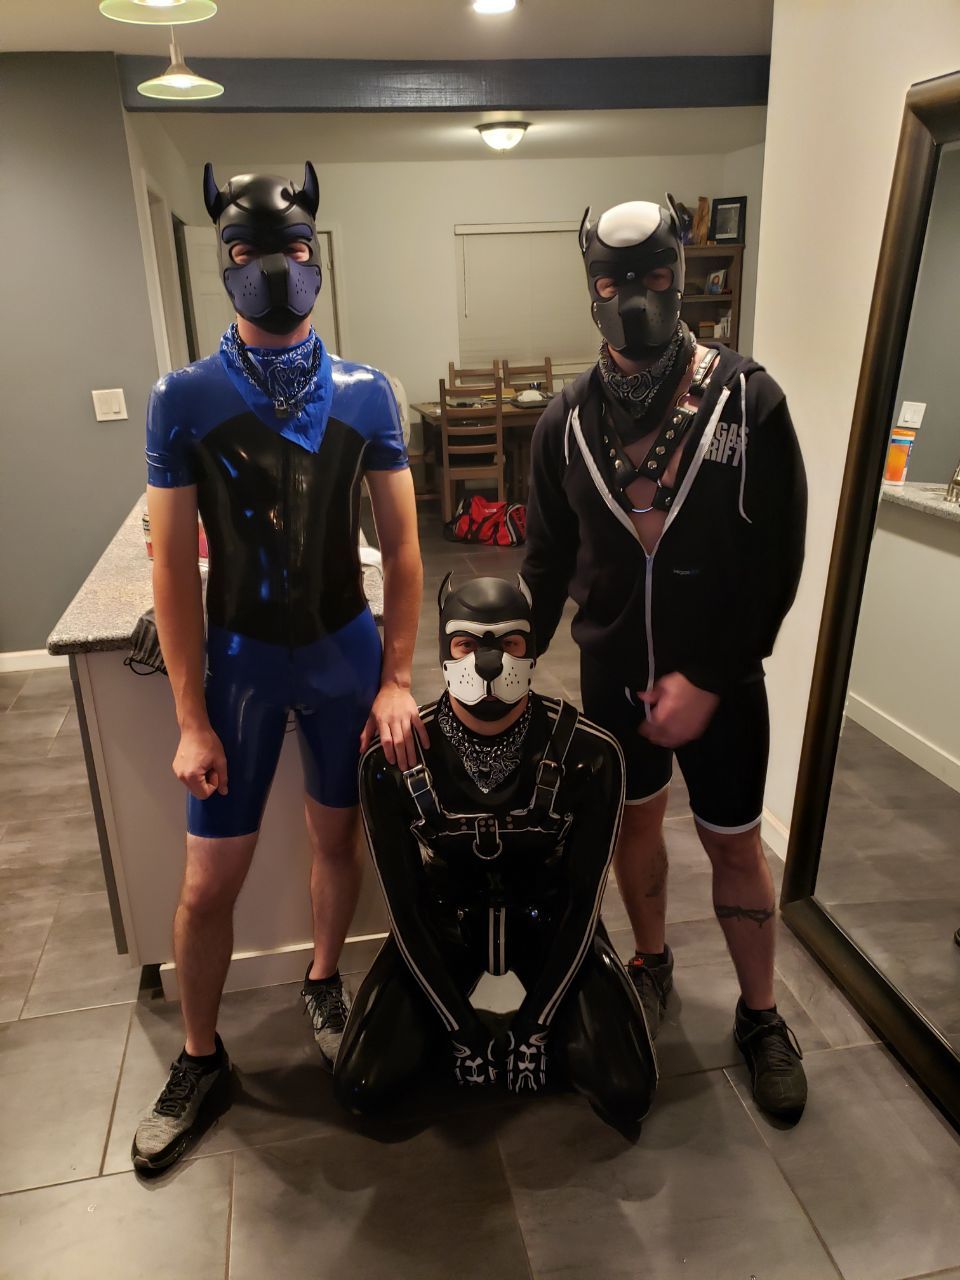 thepupscout:  Gear night with @lykospup and @pup-sparky 